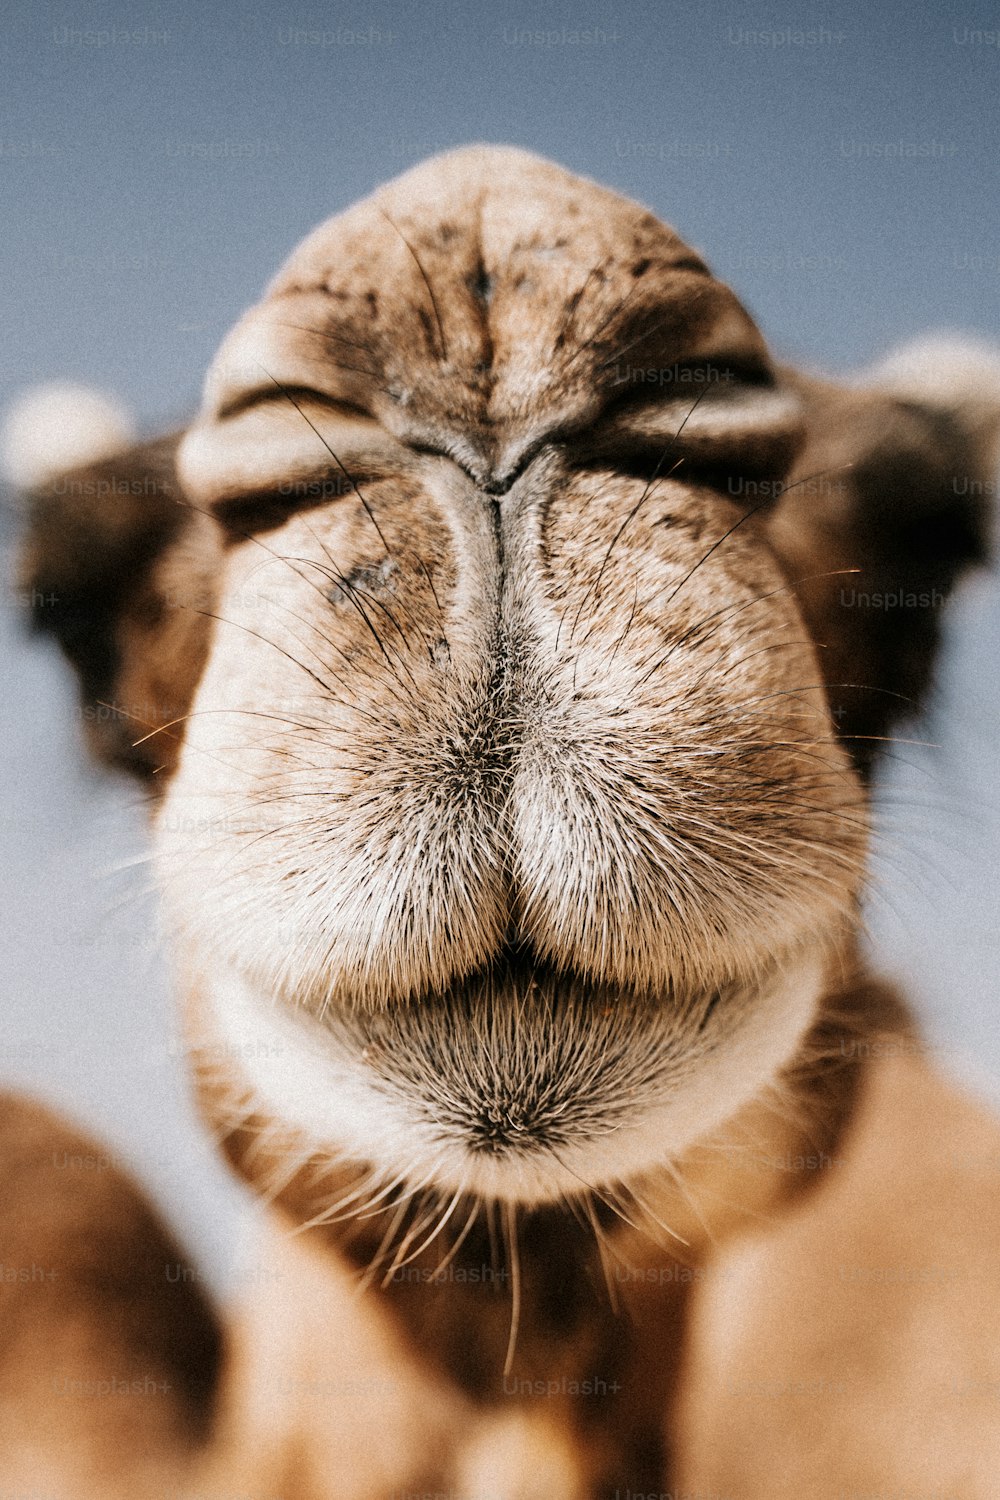 a close up of a camel's face with its eyes closed